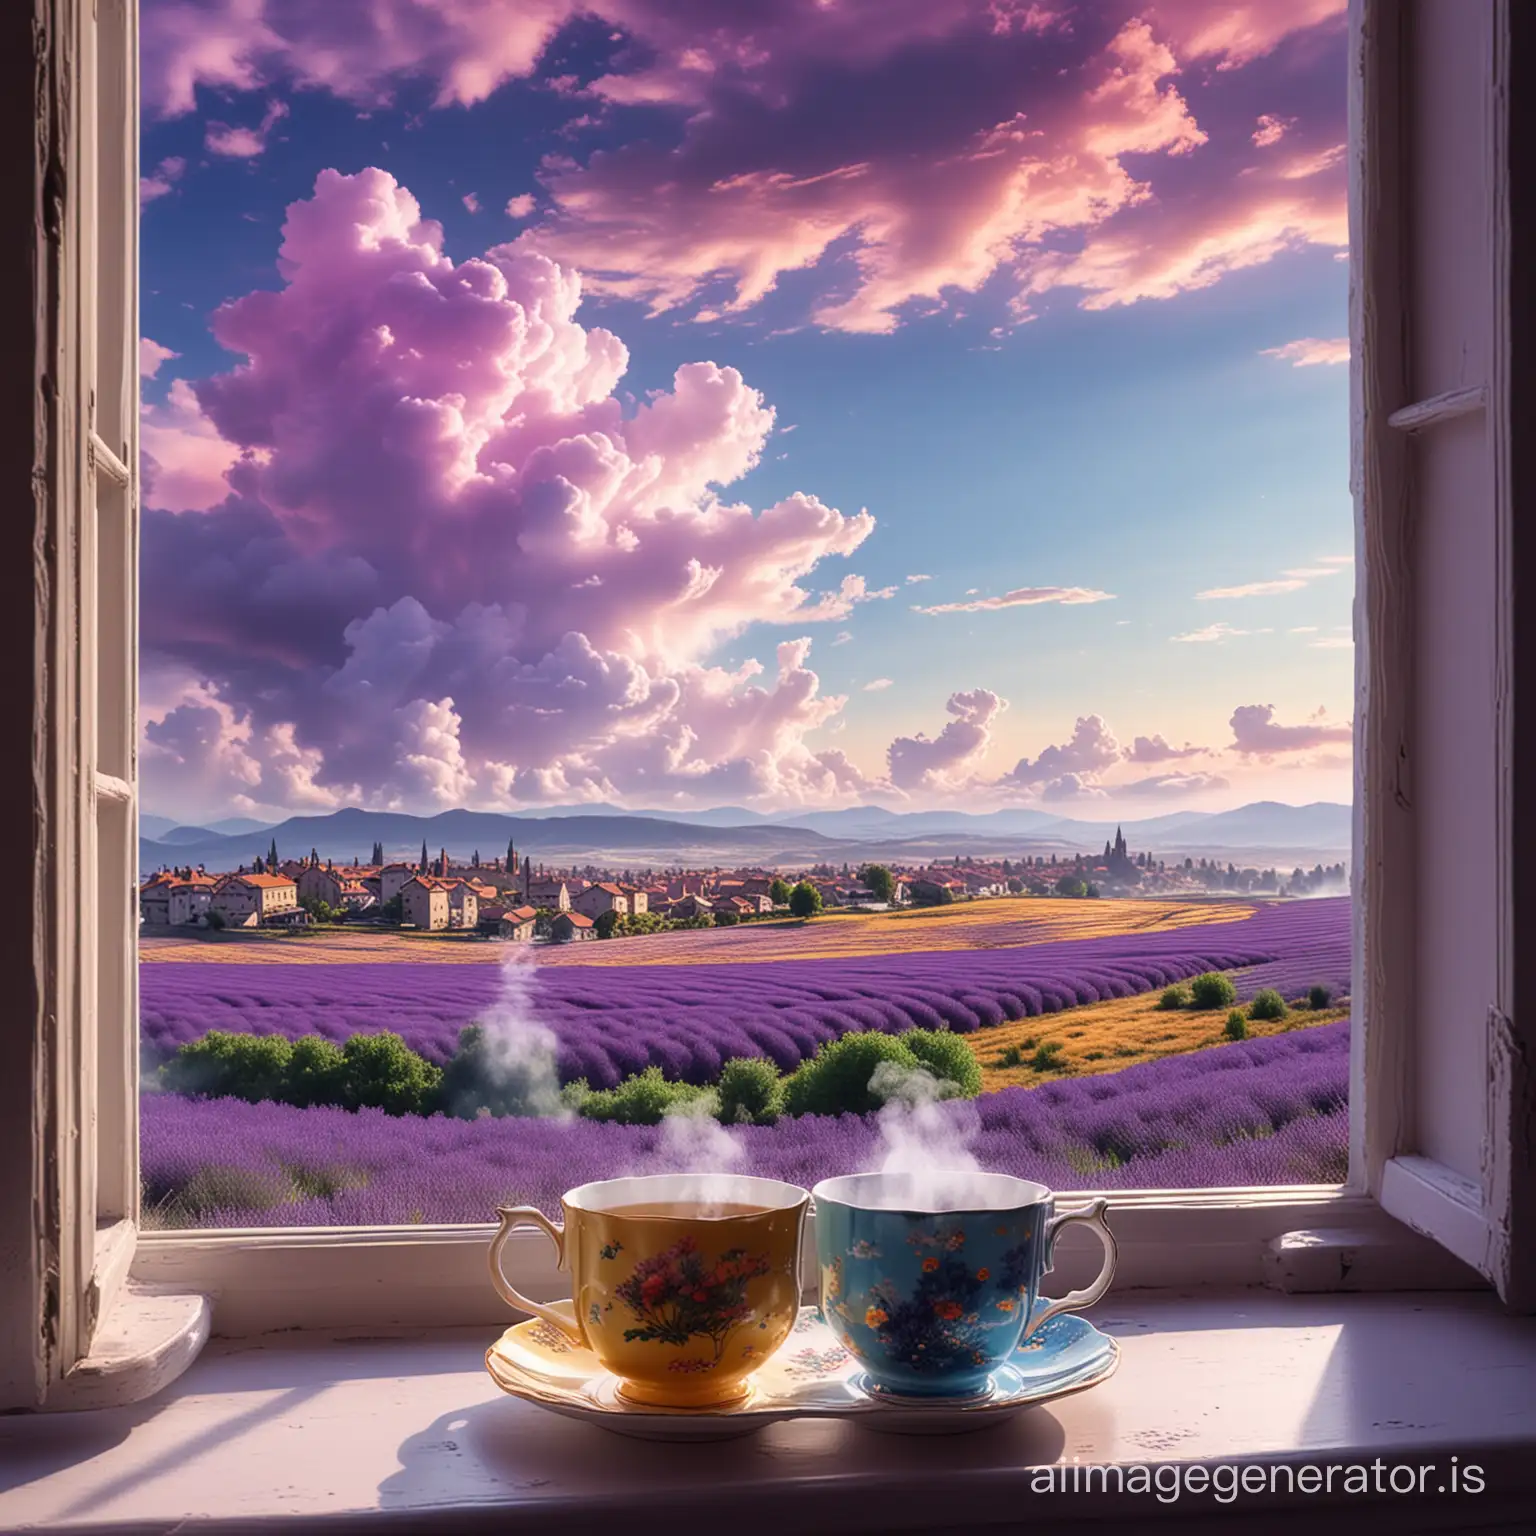 Psychedelic fantasy style, on the windowsill of an open window stands an exquisite tea cup, from which comes steam, moving away from the cup, the steam becomes multicolored, turning into huge lavender colored clouds, looming over the fields and cities